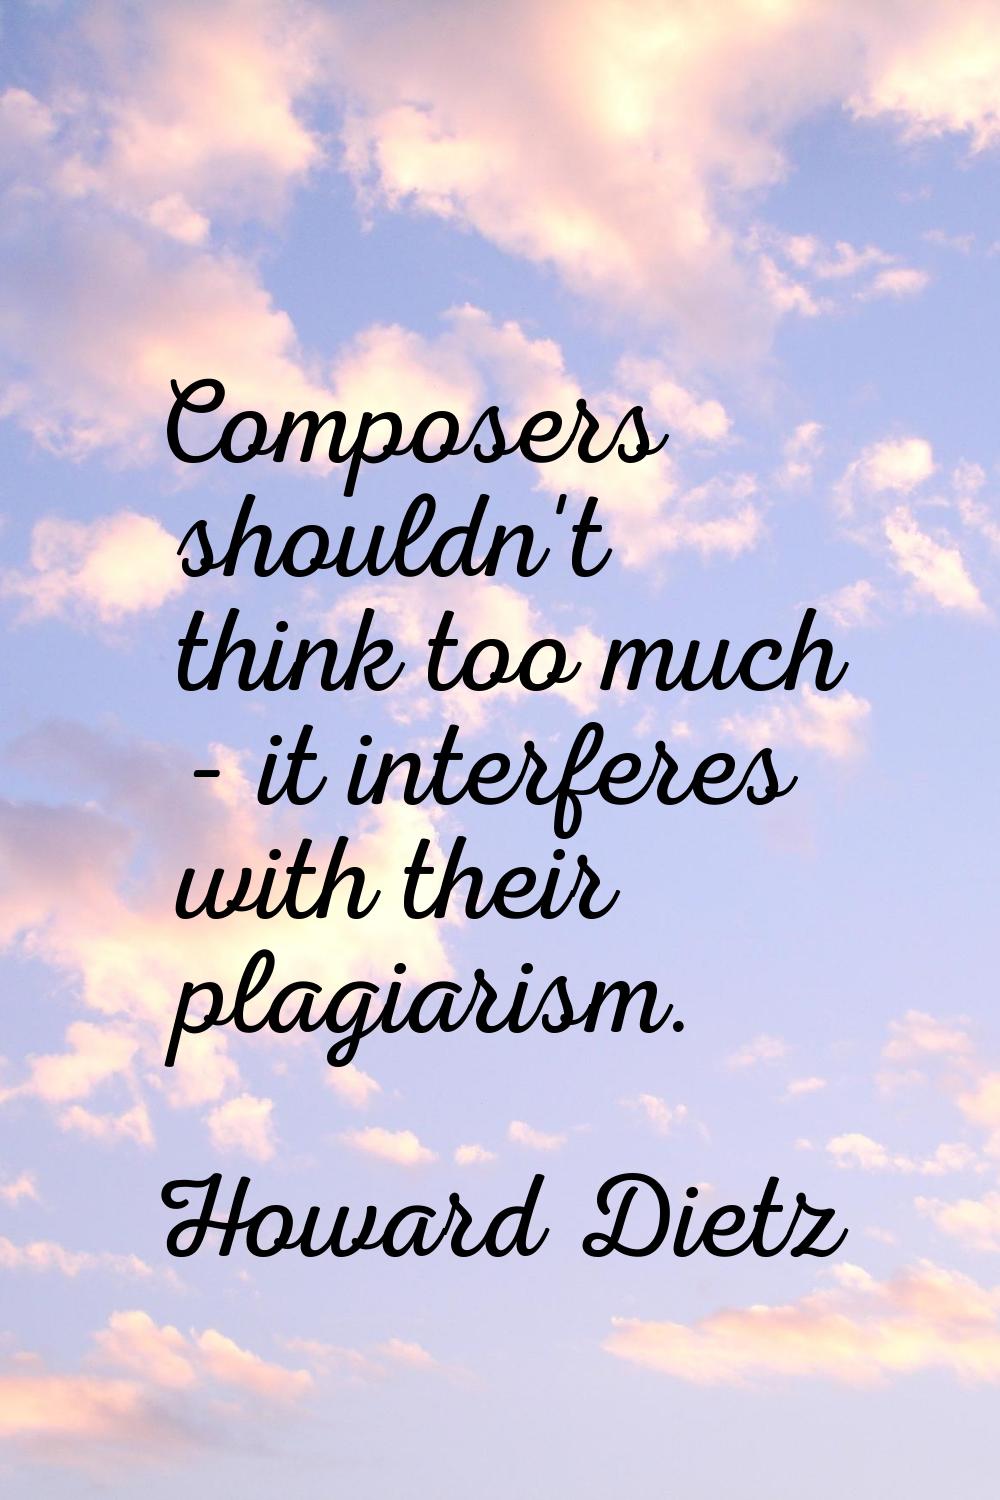 Composers shouldn't think too much - it interferes with their plagiarism.